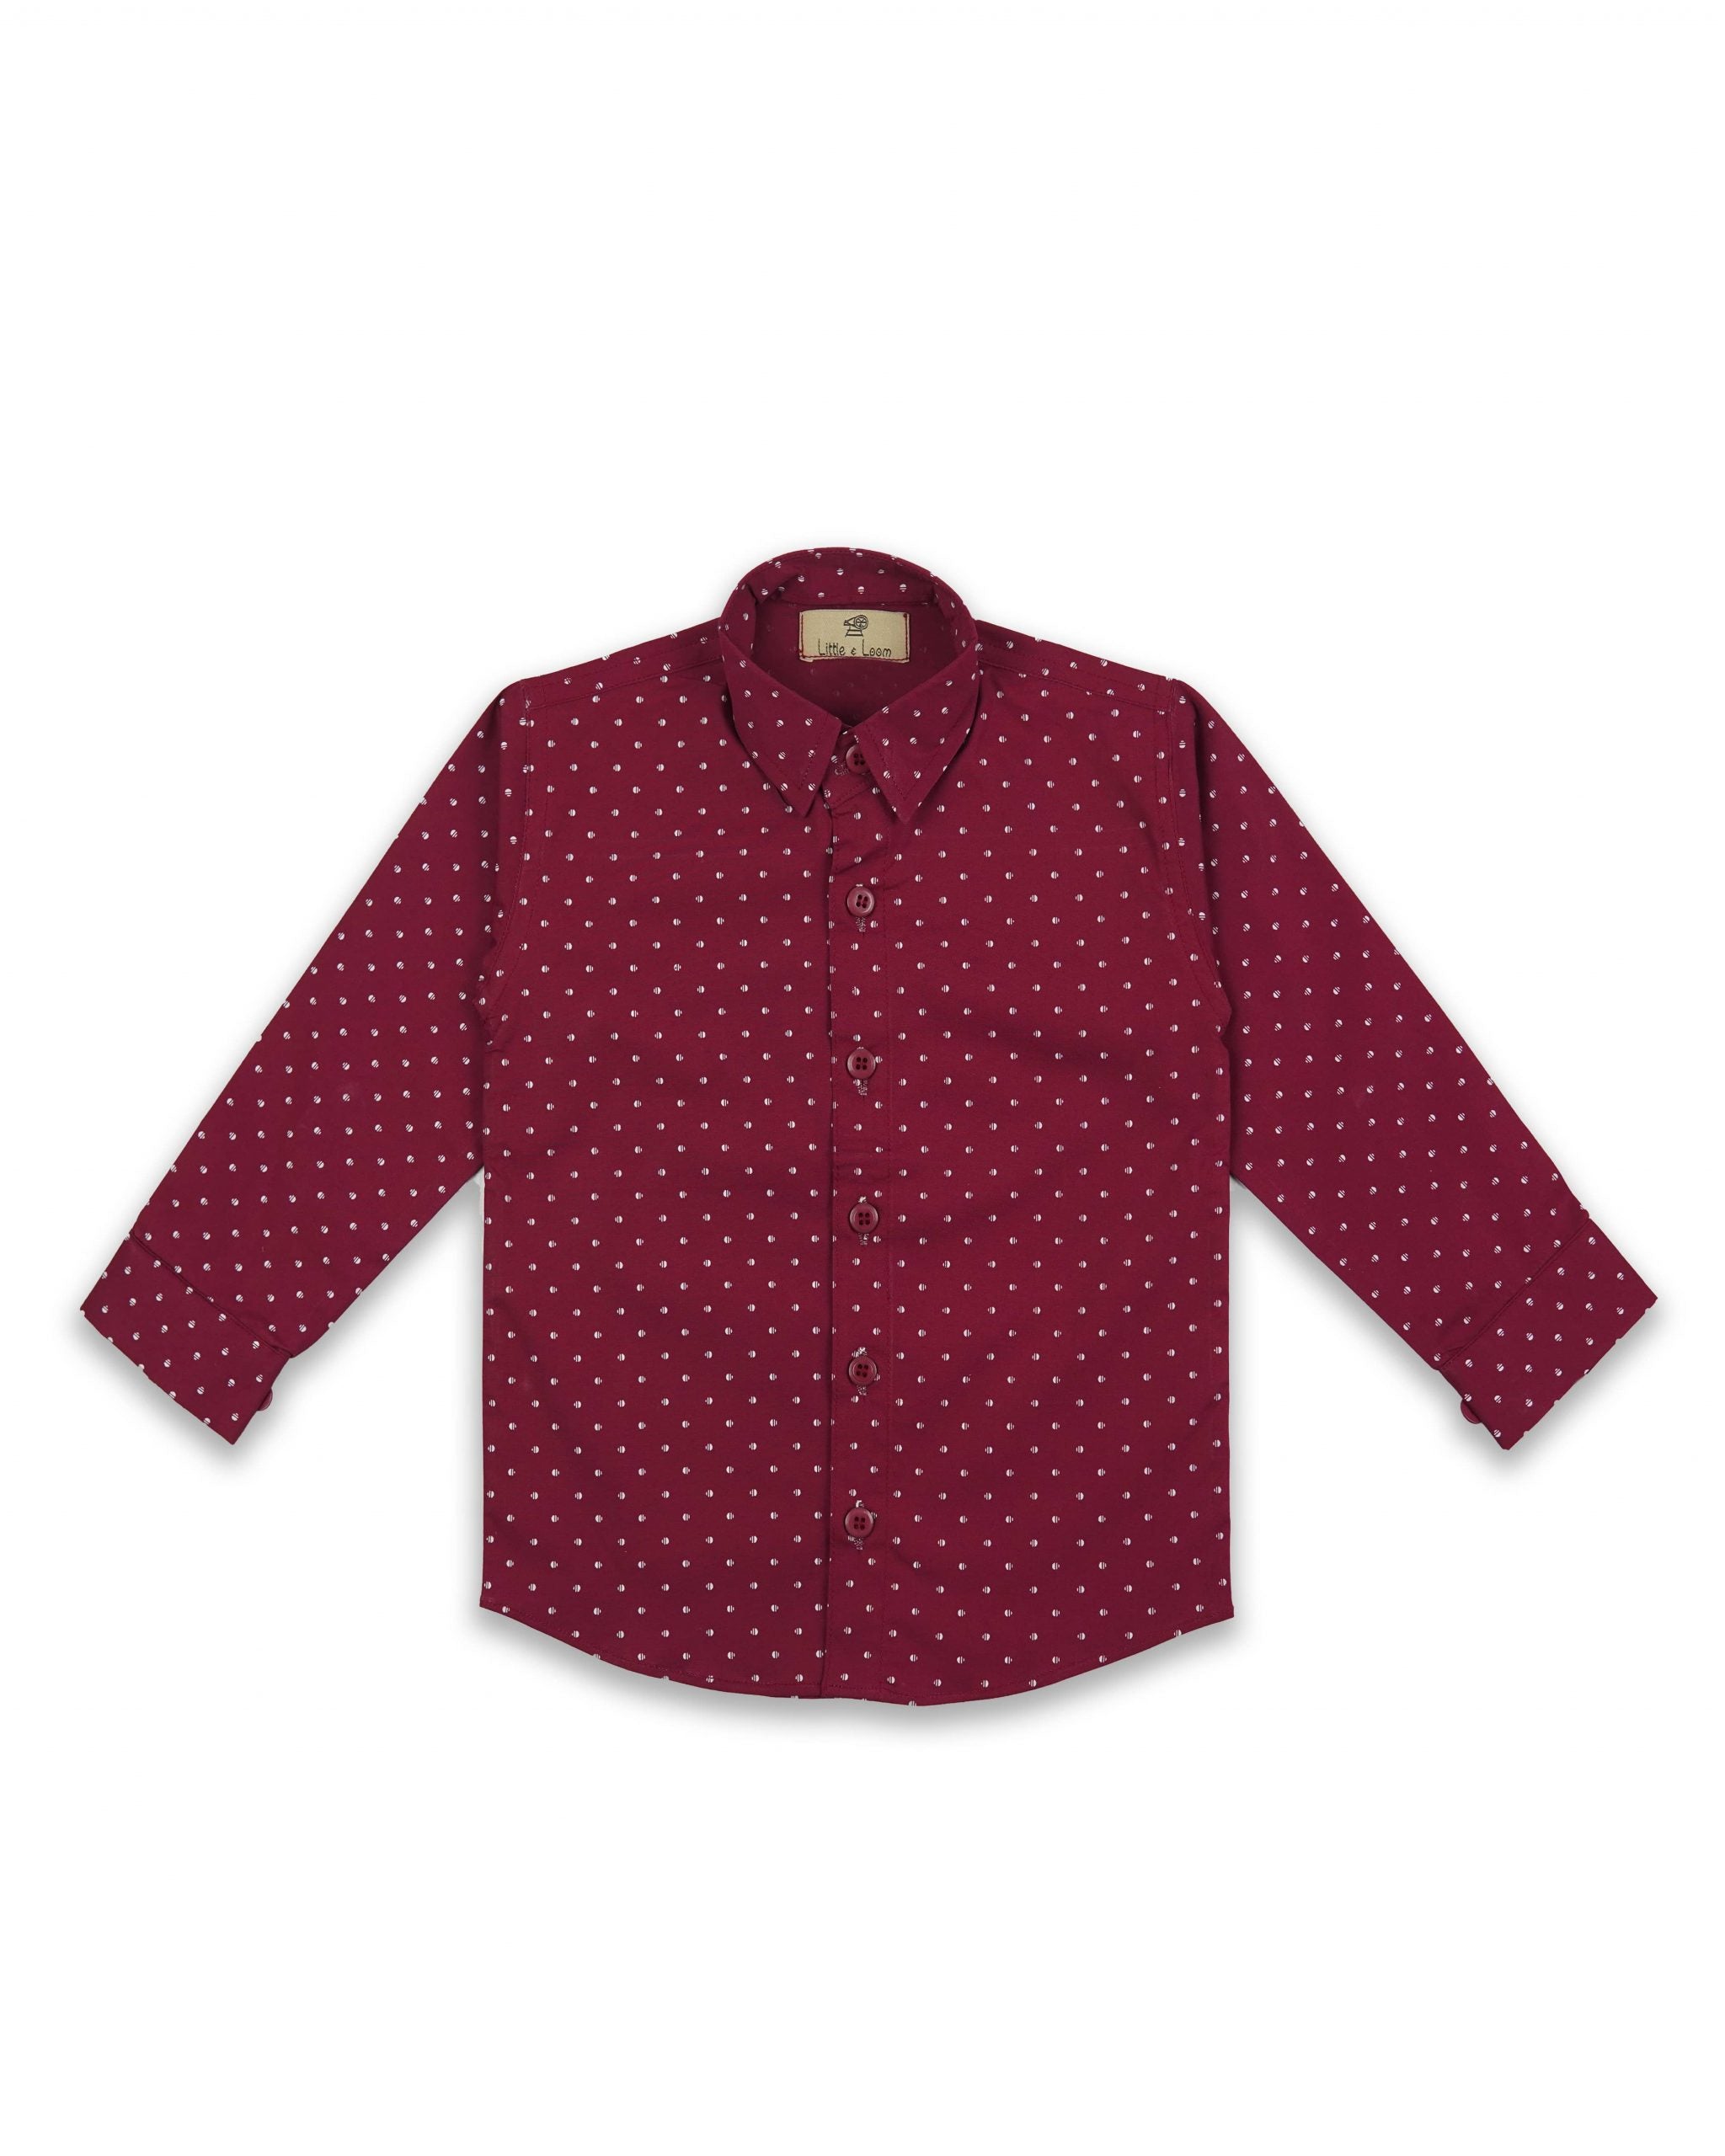 RED DOTTED SHIRT